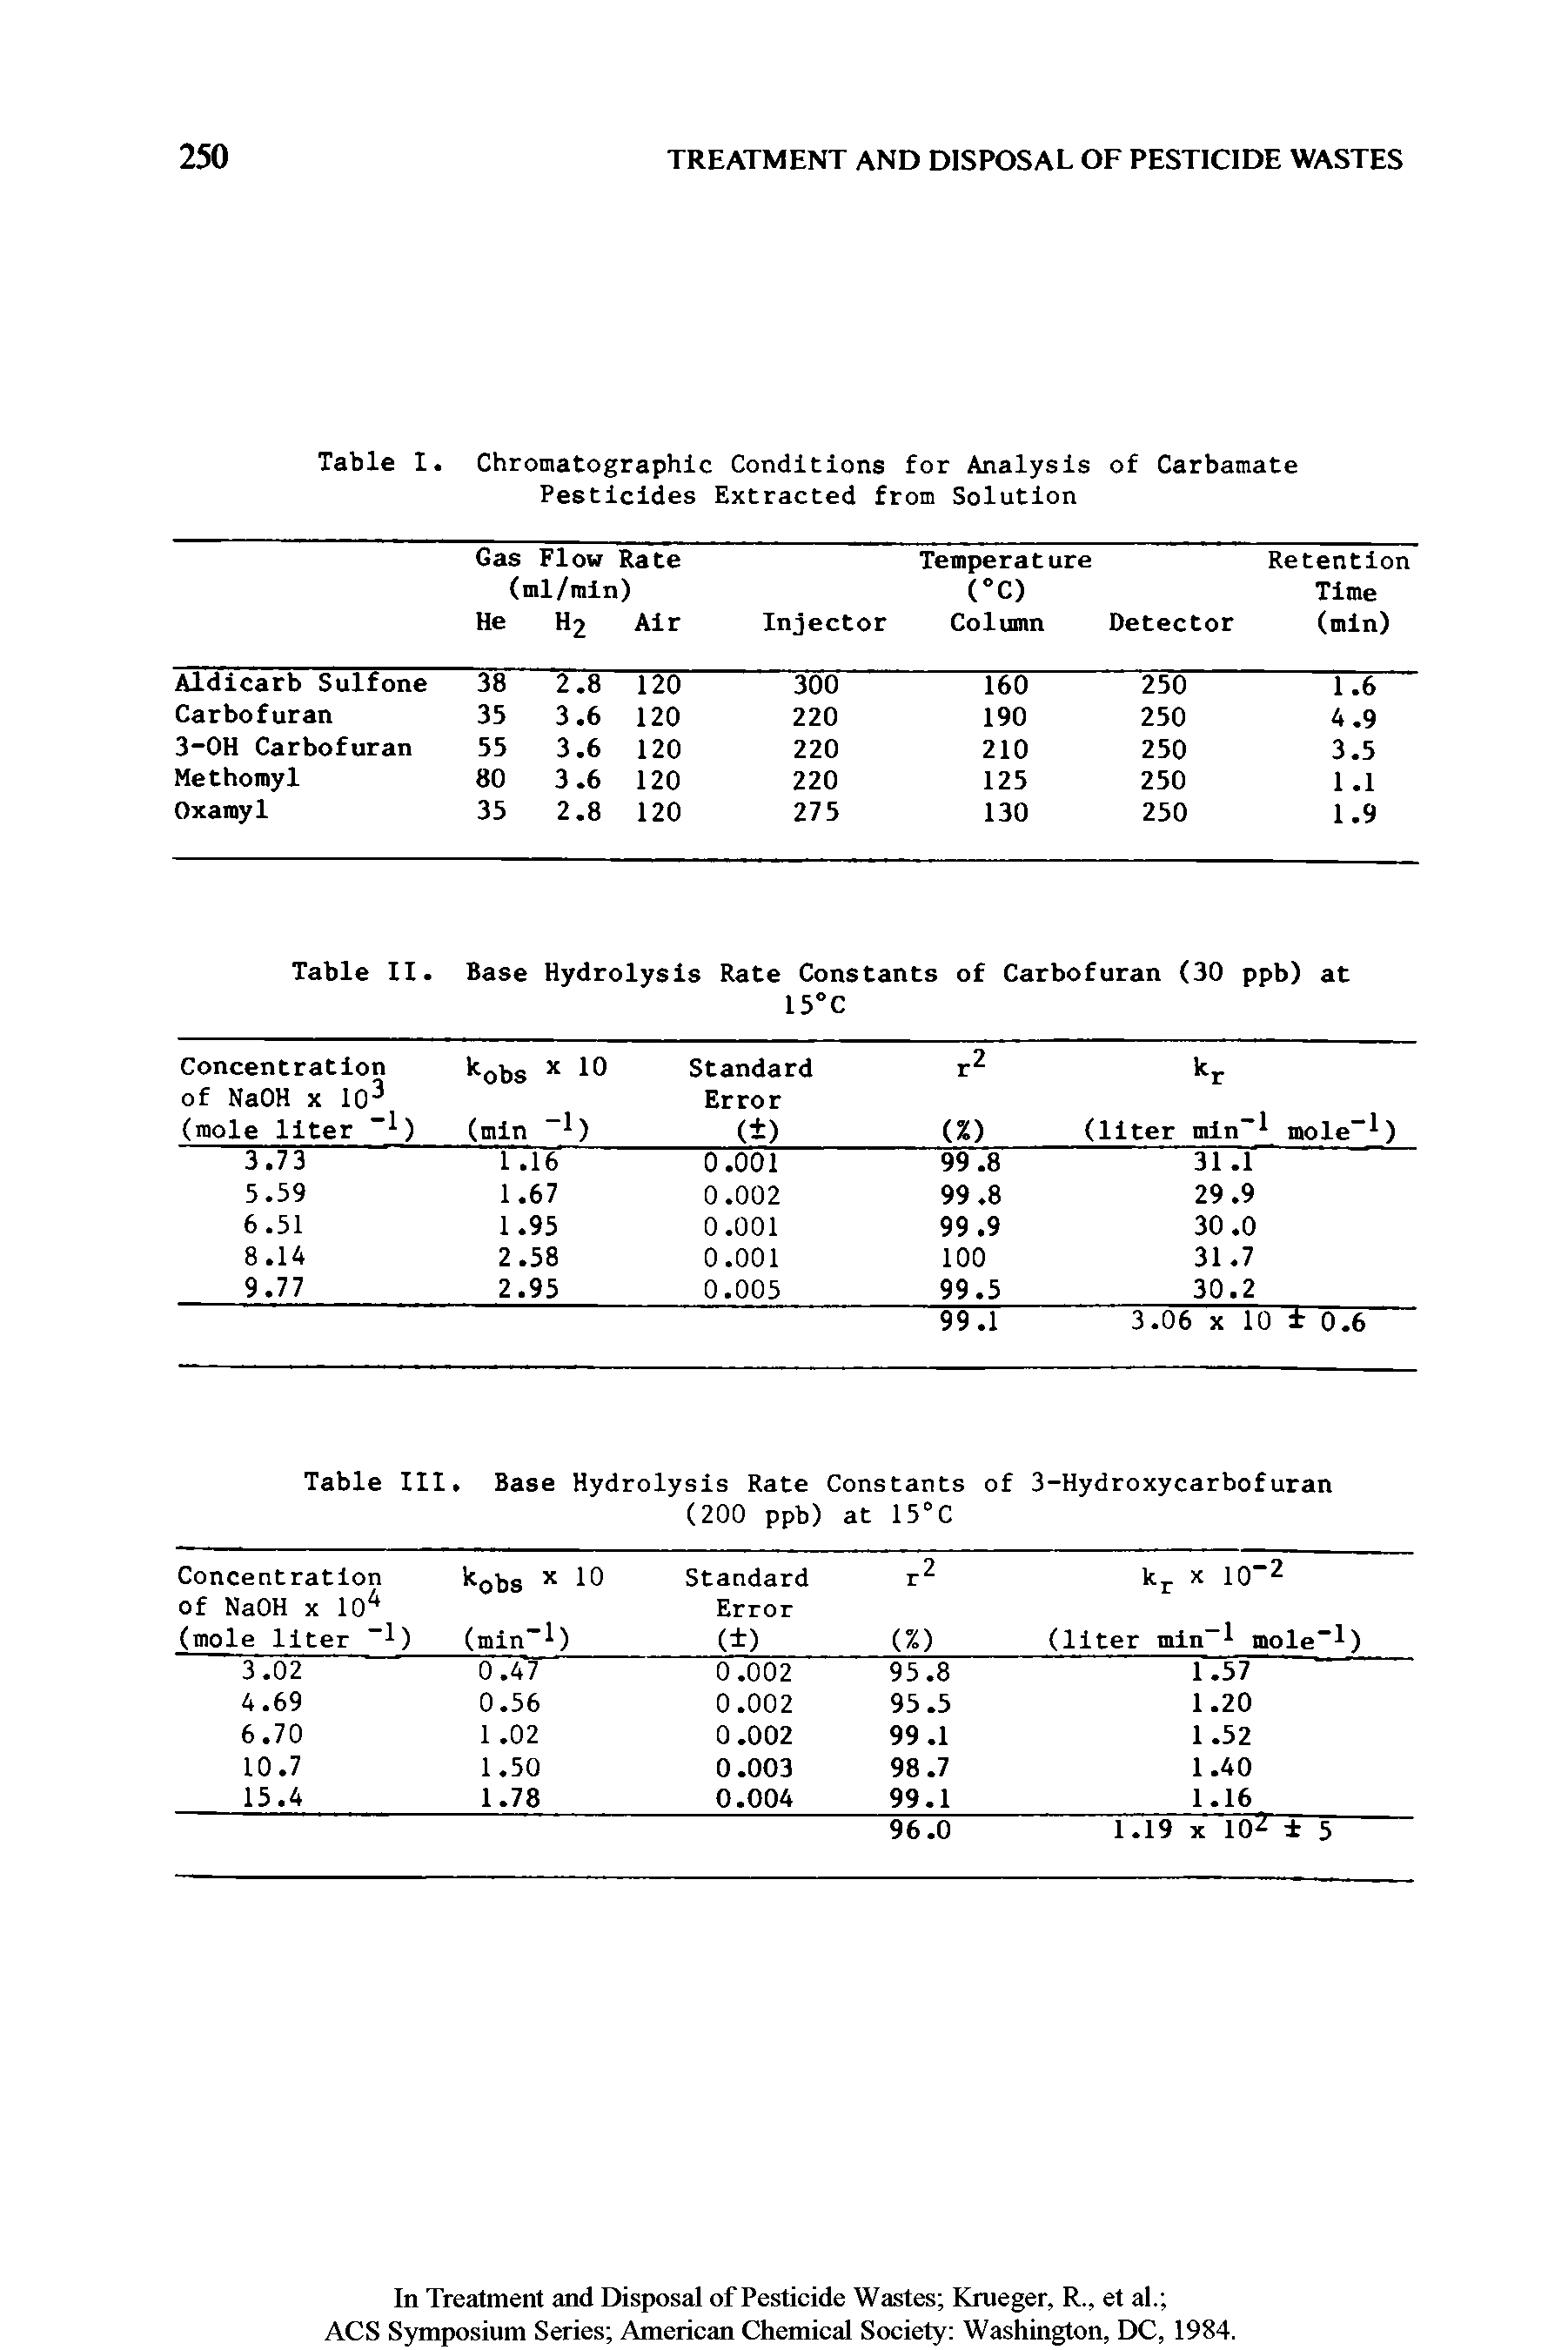 Table II. Base Hydrolysis Rate Constants of Carbofuran (30 ppb) at ...